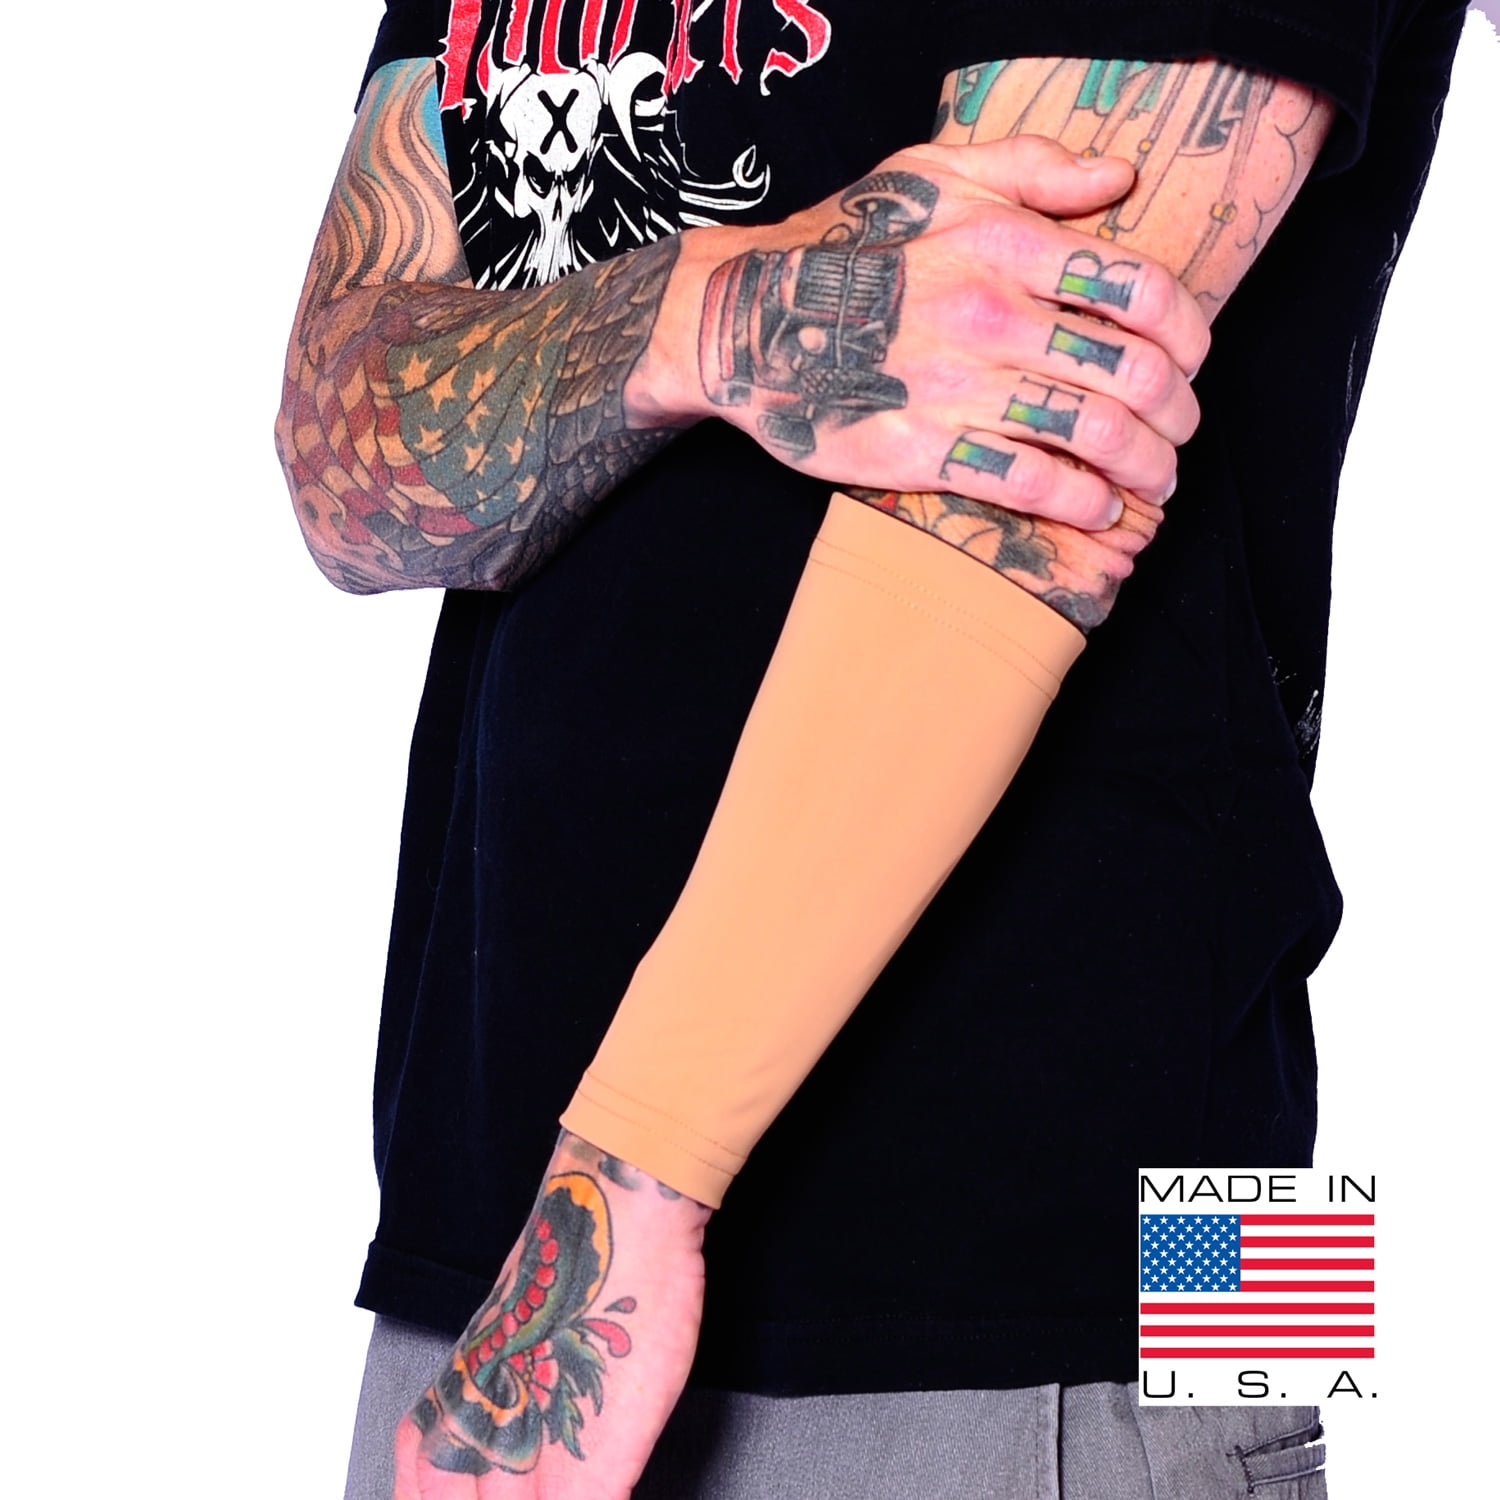 Tat2X Ink Armor Forearm 9 Inch Tattoo Cover Up Sleeve for Work or School -  Proudly Made in USA - Provides UV Protection - Light Skin Tone - XSS  (single tattoo cover sleeve) 